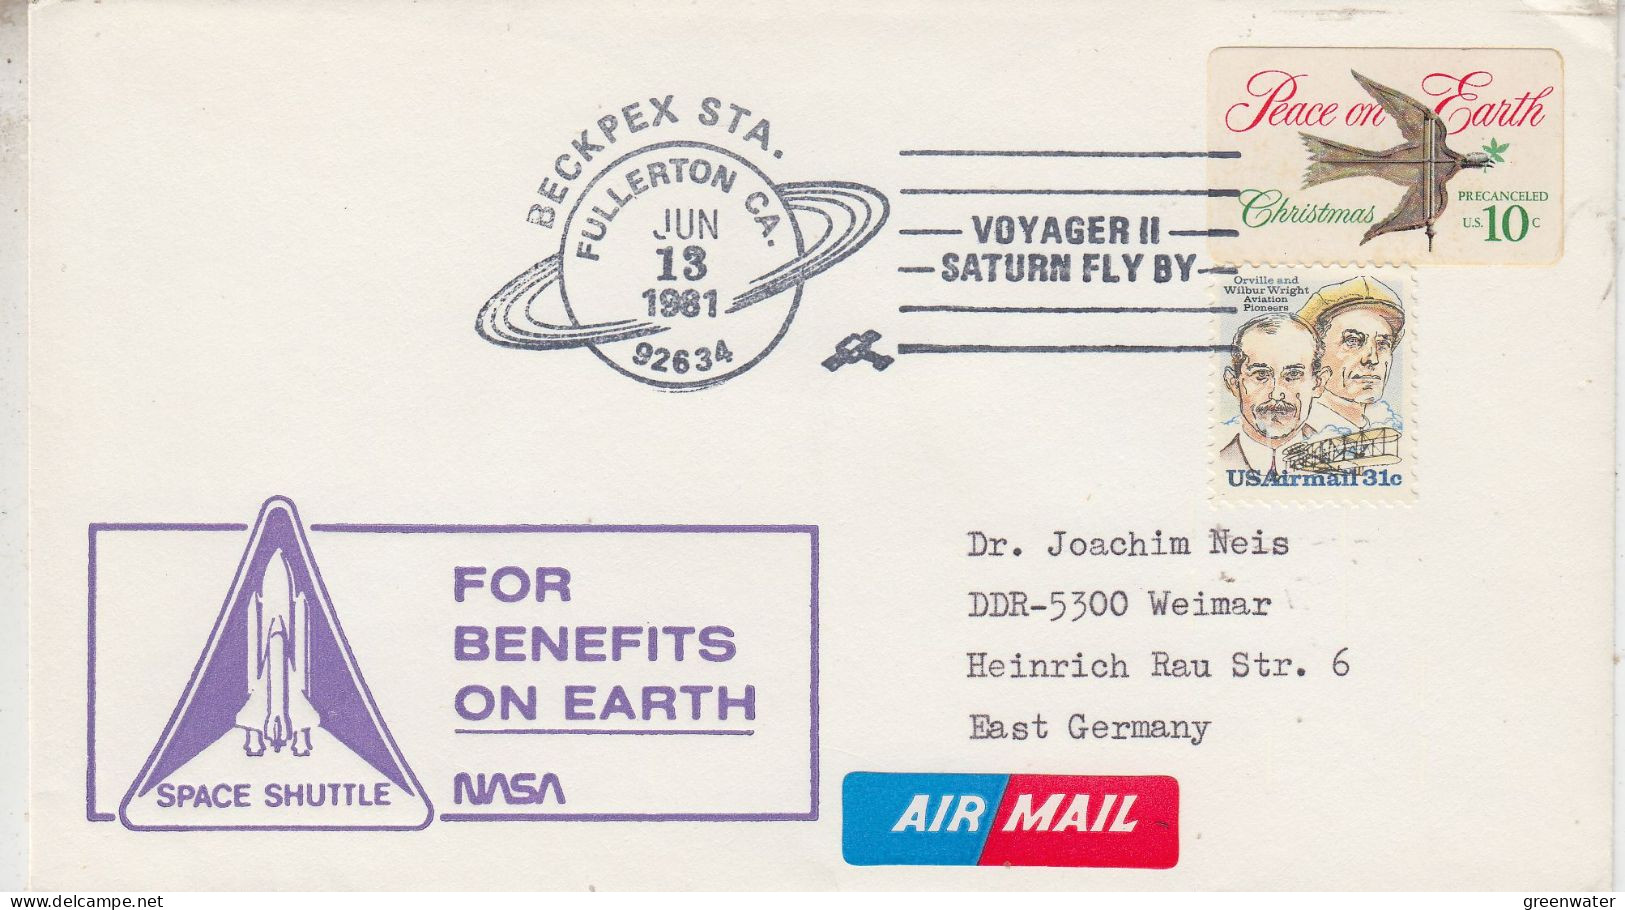 USA Voyager II Saturn Fly By Ca Beckpex Sta Fullerton Ca JUN 13 1981 (SD217) - North  America